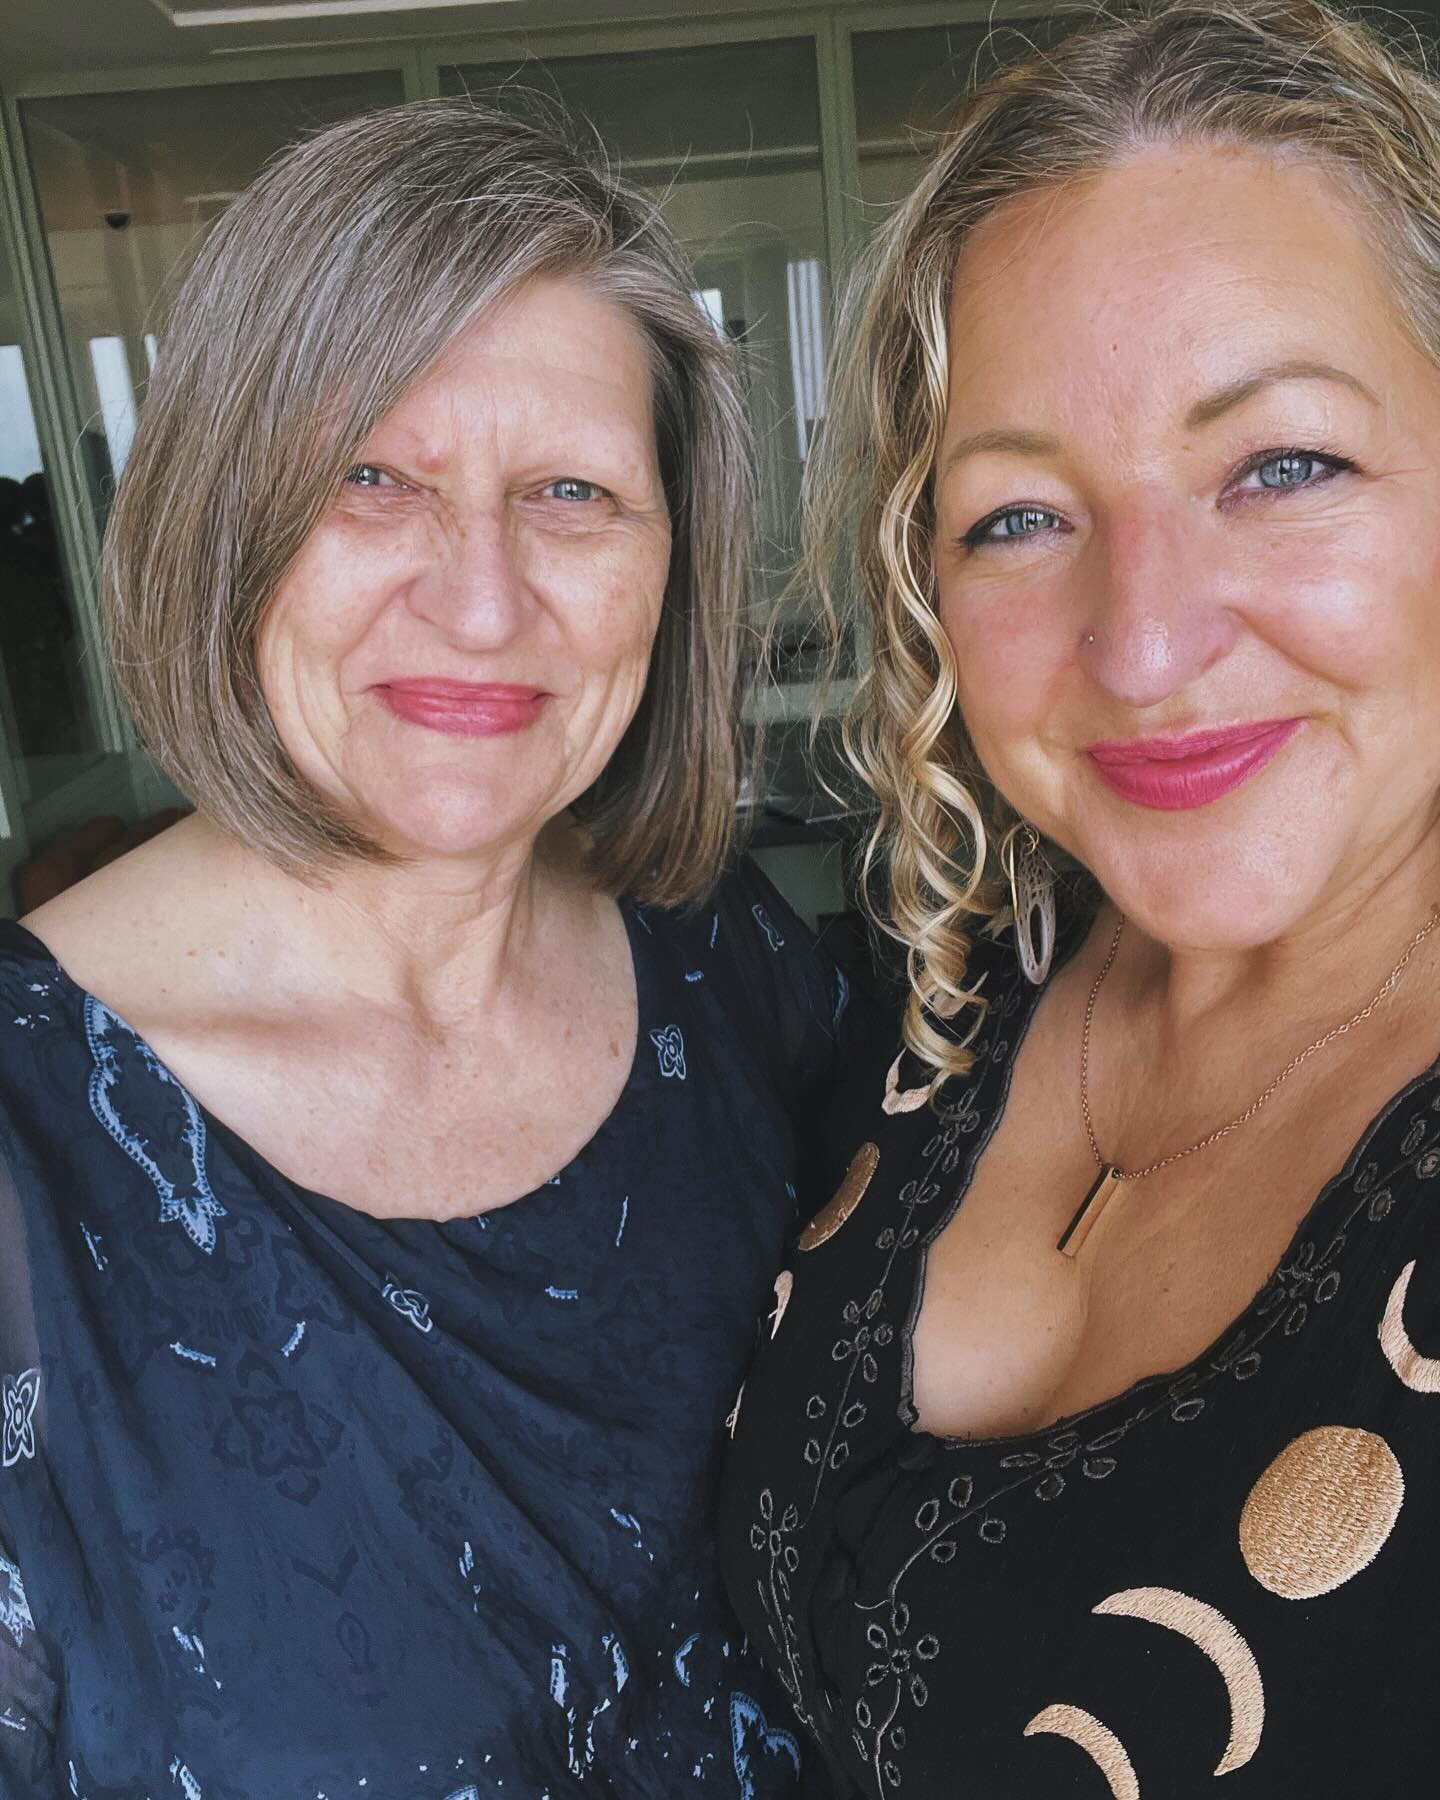 When was the last time you carved out a whole day to focus on you, your big bold vision, visibility and business growth?

Yesterday I hosted the most amazing VIP day with my client Sally creating her next level leadership and visibility in a stunning